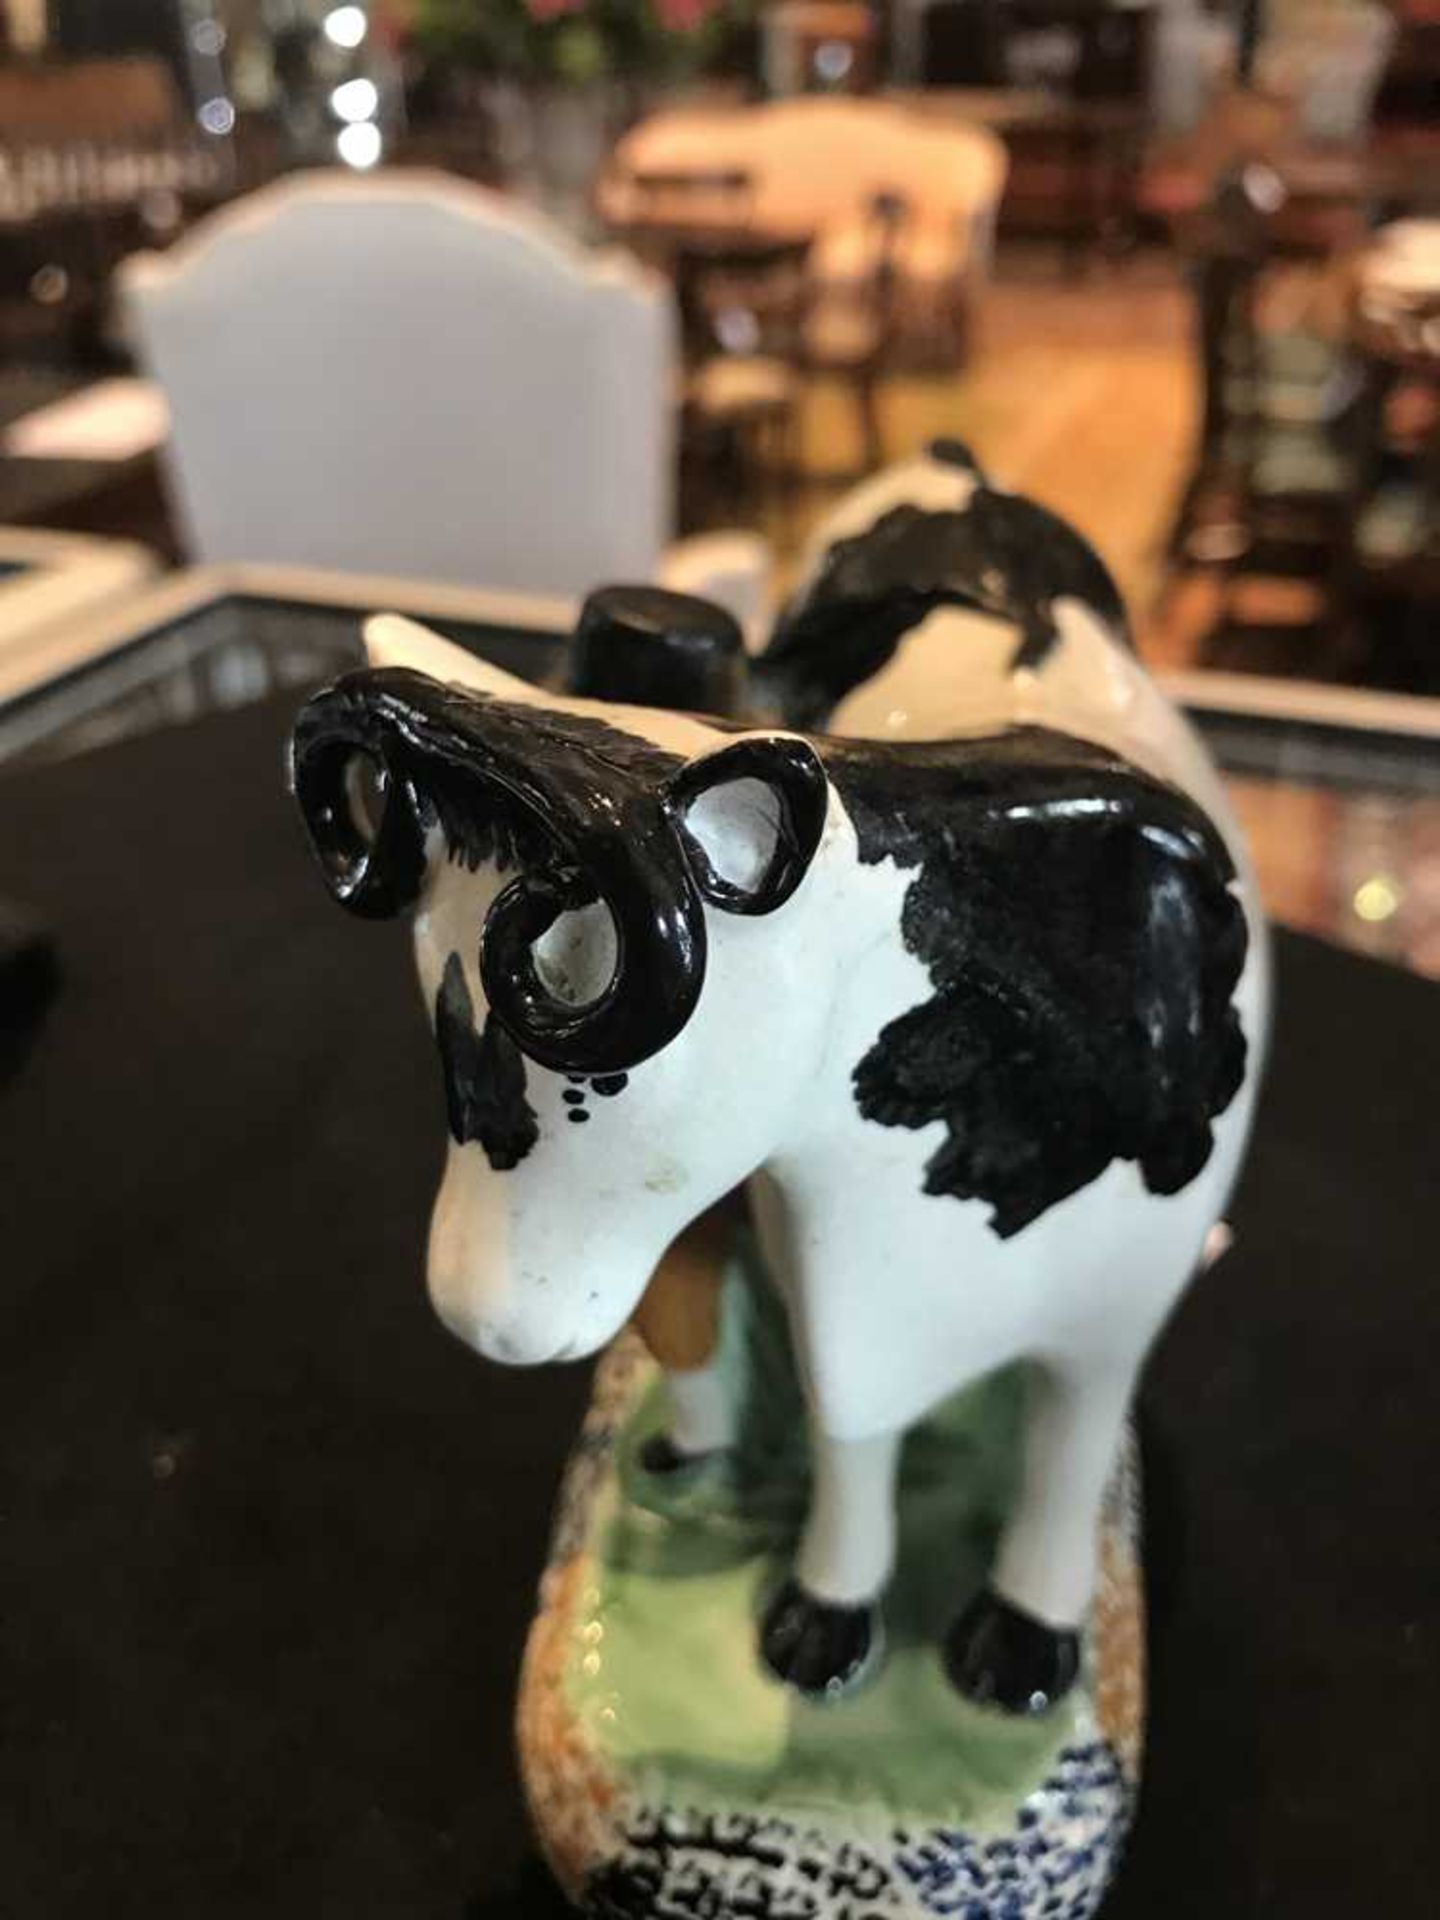 YORKSHIRE POTTERY PRATTWARE COW FIGURE GROUP EARLY 19TH CENTURY - Image 5 of 6